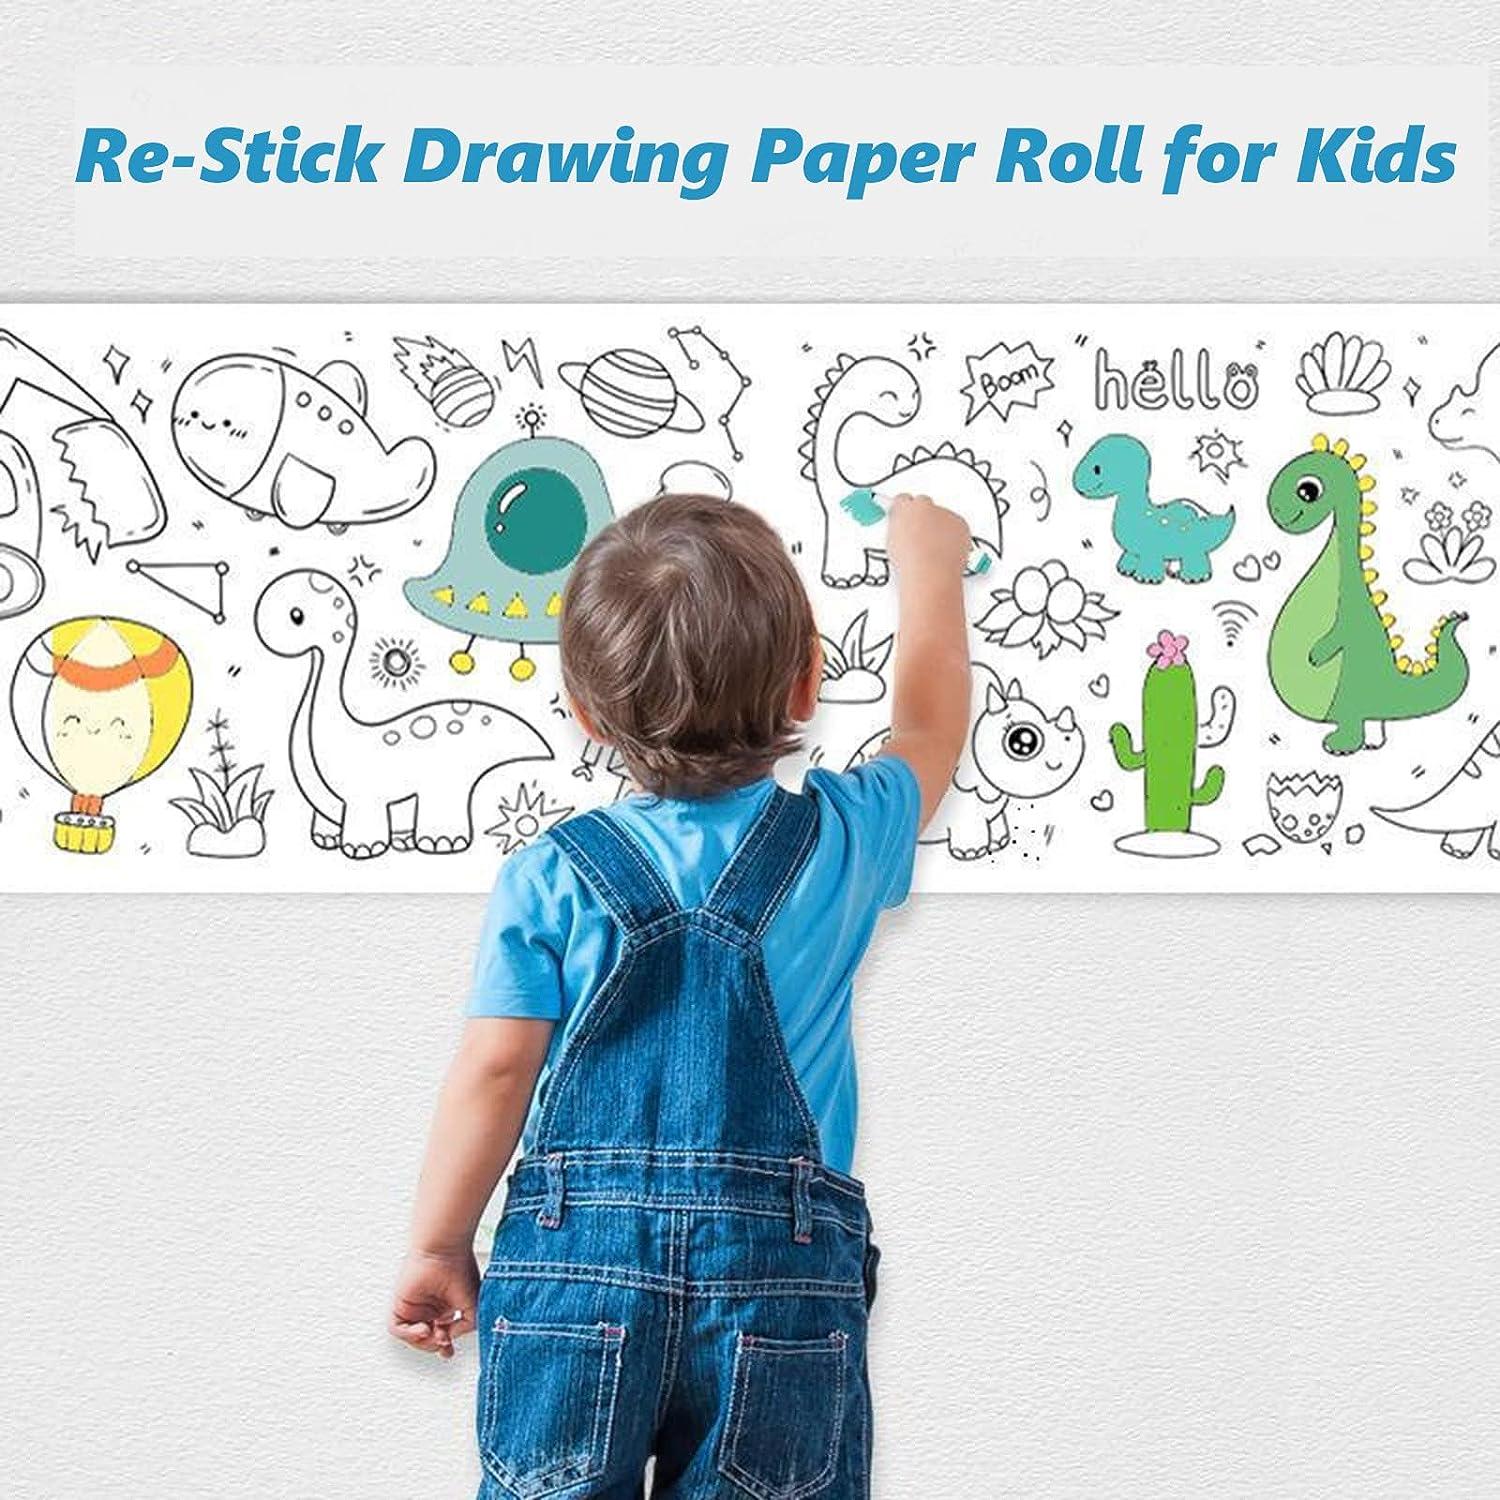 Drawing Paper Roll,drawing Paper For Kids - Re-stick Drawing Paper Roll  Children's Coloring Roll Drawing Paper Art Home Activities For Wall And  Desk